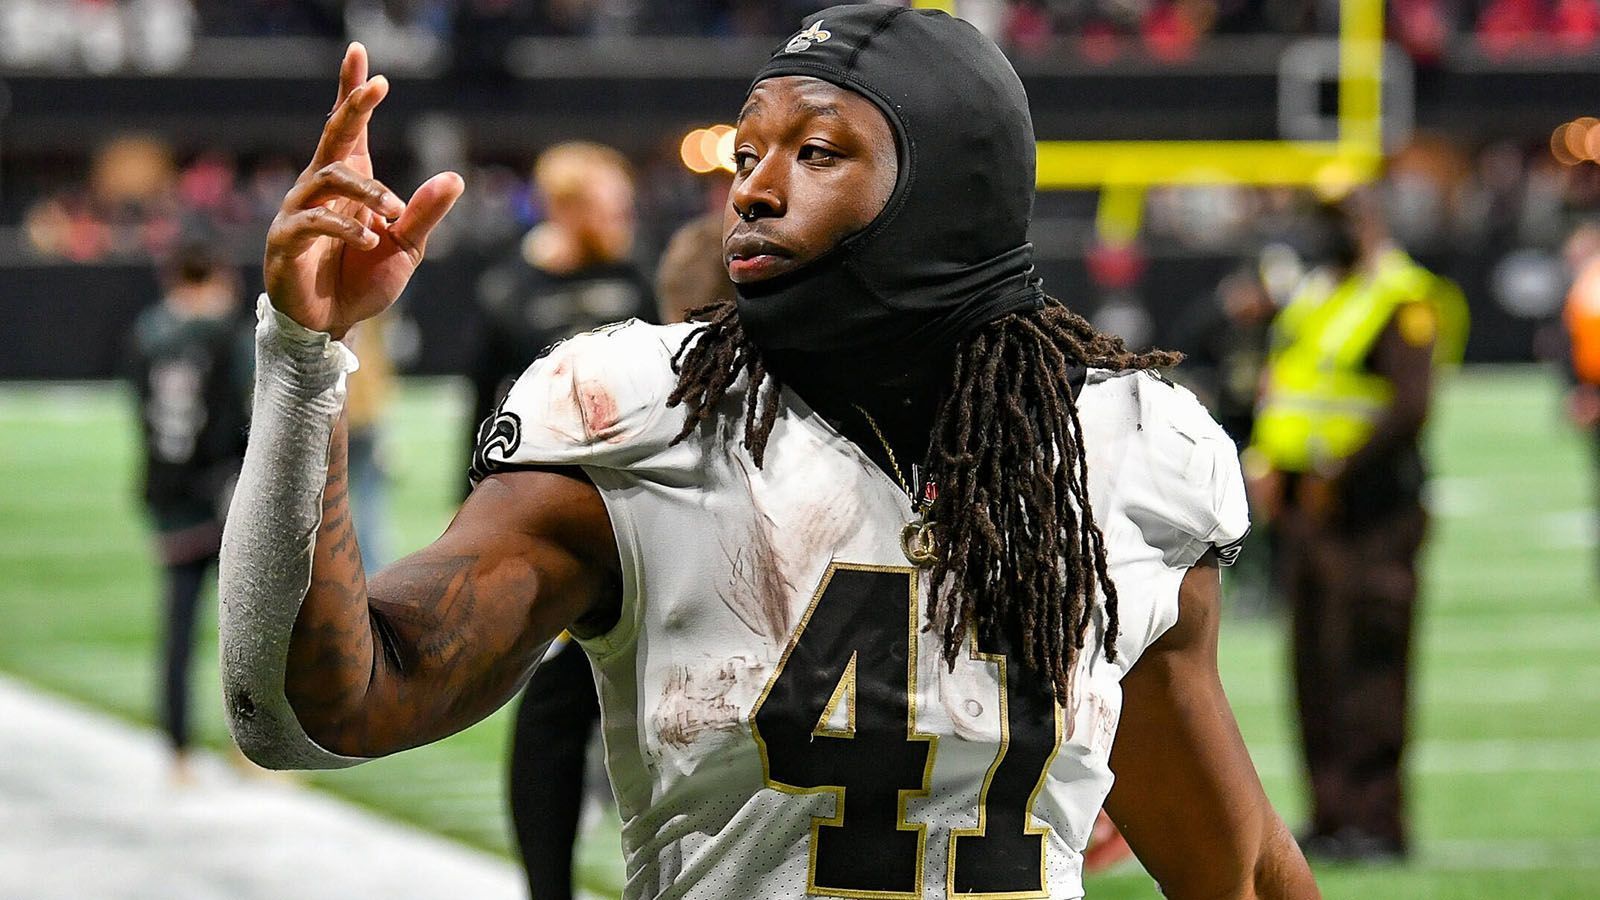 
                <strong>7. Platz: Alvin Kamara</strong><br>
                &#x2022; Team: New Orleans Saints<br>&#x2022; Position: Running Back<br>&#x2022; <strong>Overall Rating: 90</strong><br>&#x2022; Key Stats: Speed 89 - Acceleration 94 - Agility 92<br>
              